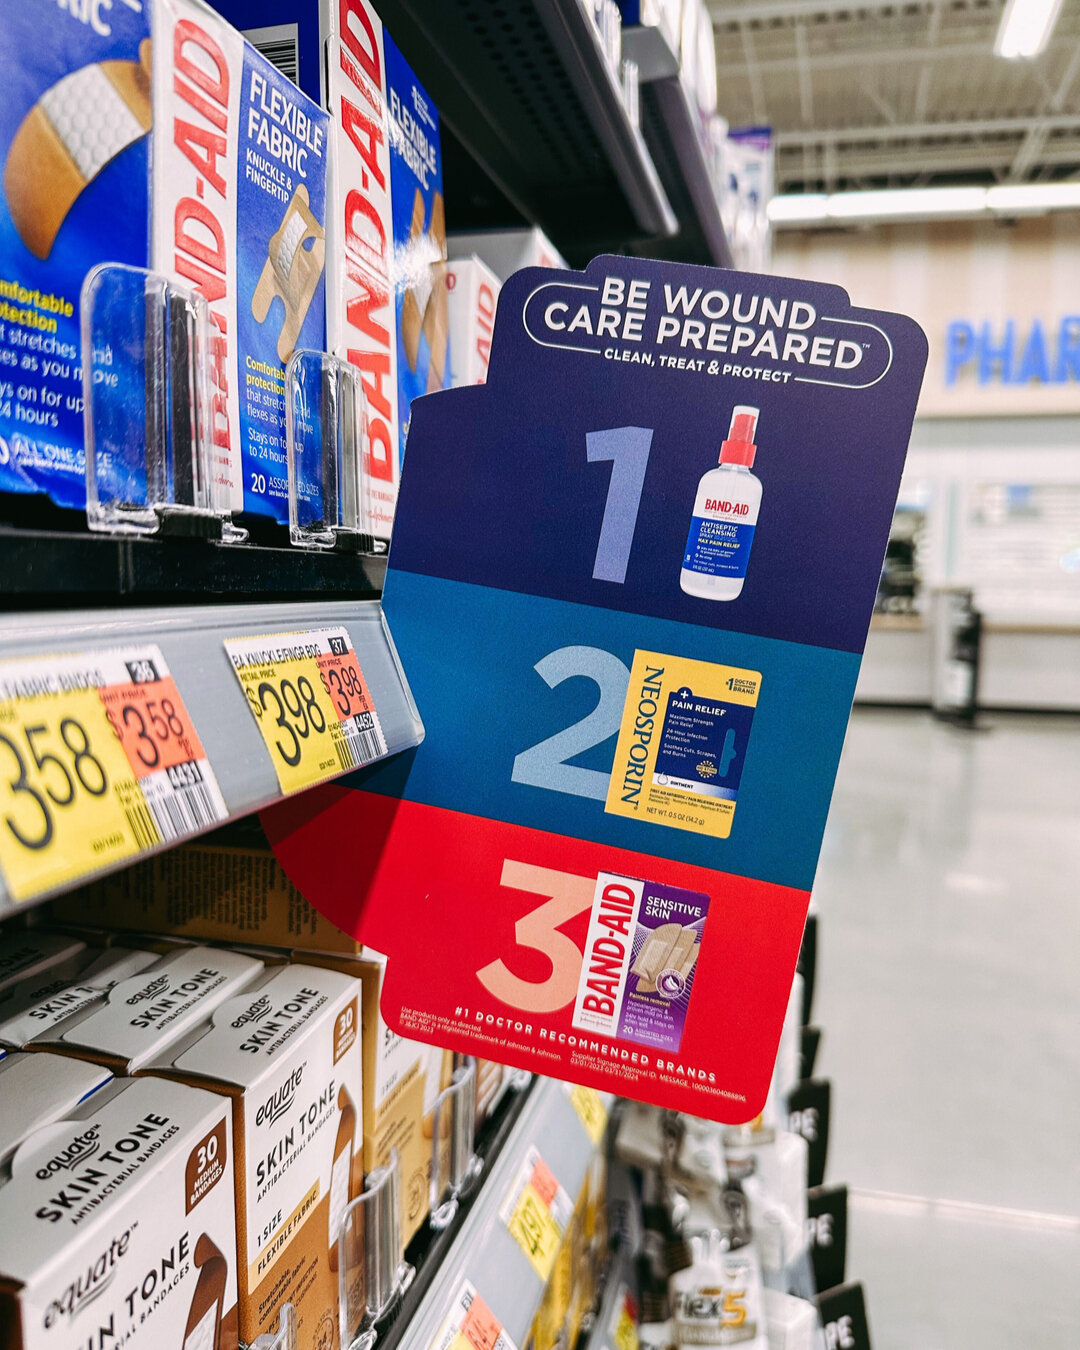 Match your bold actions with even bolder Band-Aids!​​​​​​​​​
We had the pleasure of designing the in-store signage for Johnson &amp; Johnson&rsquo;s all-new limited edition line of Band-Aids. Be sure to check it out, in person, at a Walmart near you!